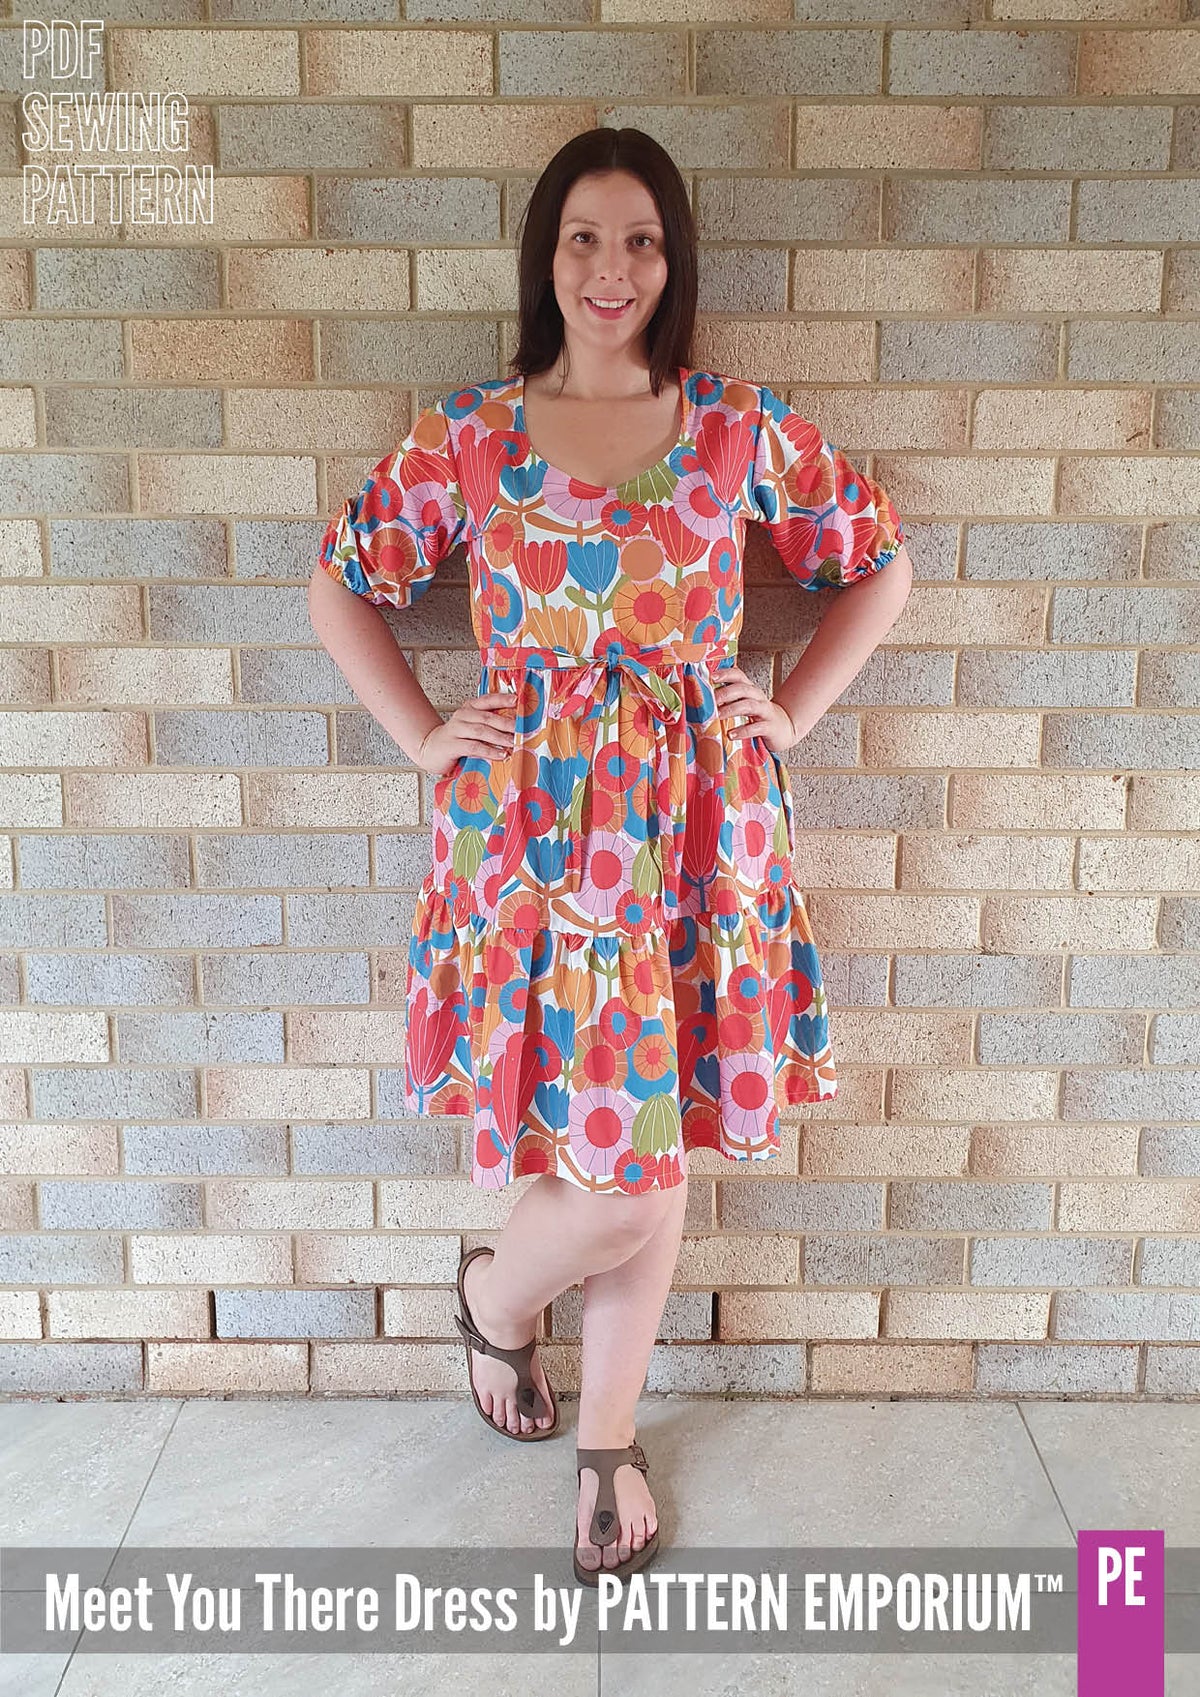 PATTERN EMPORIUM STUNNING NEW RELEASE! Meet You There Dress